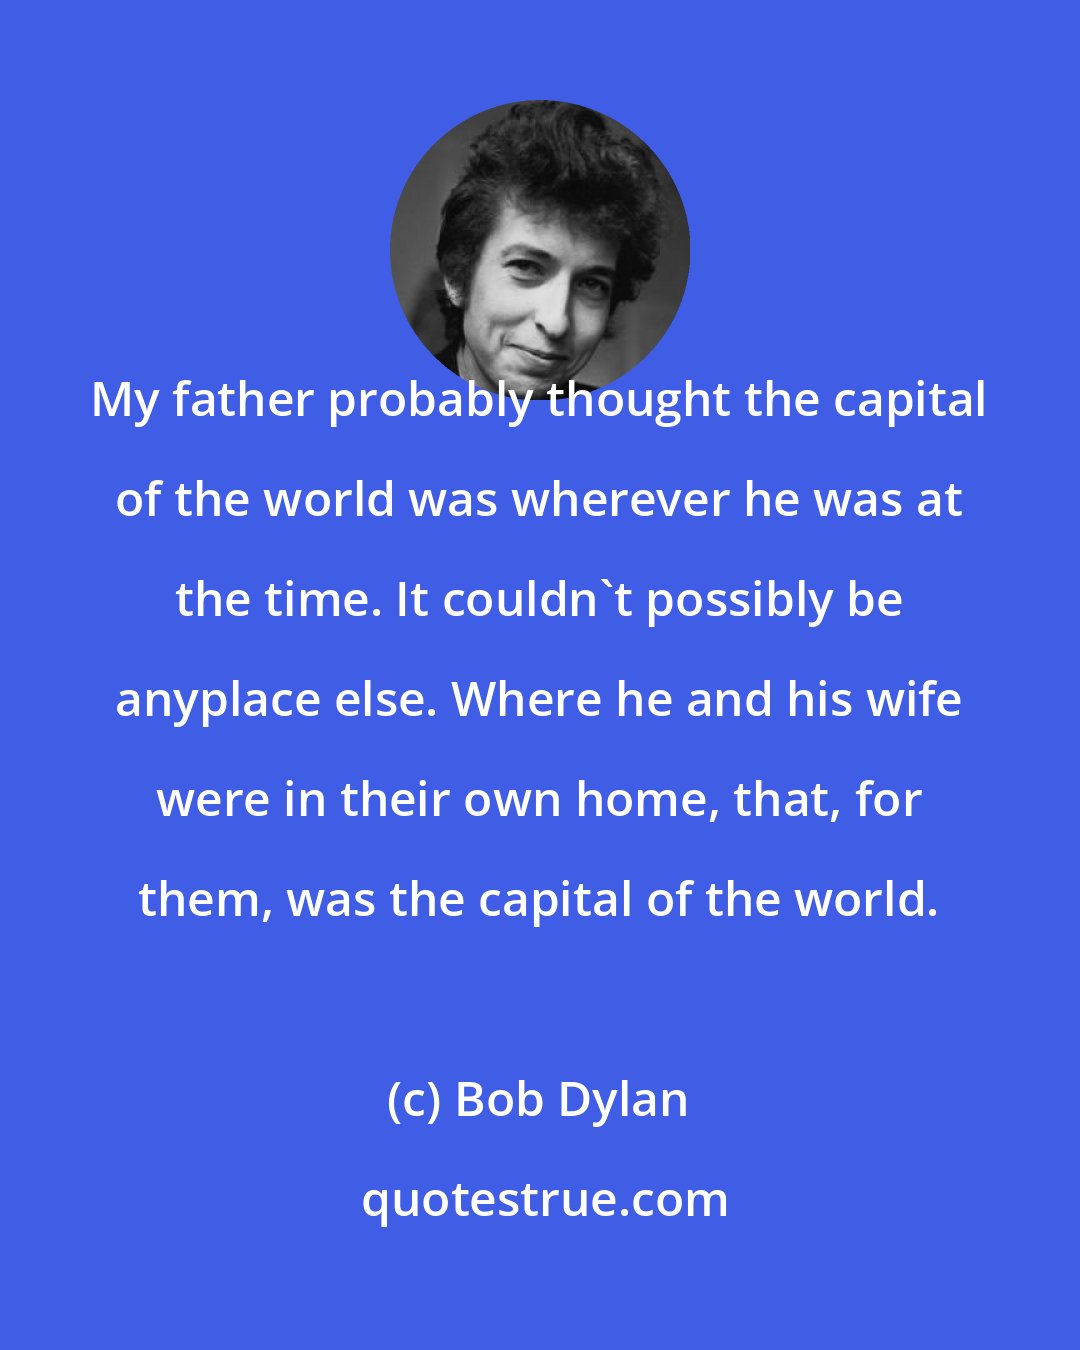 Bob Dylan: My father probably thought the capital of the world was wherever he was at the time. It couldn't possibly be anyplace else. Where he and his wife were in their own home, that, for them, was the capital of the world.